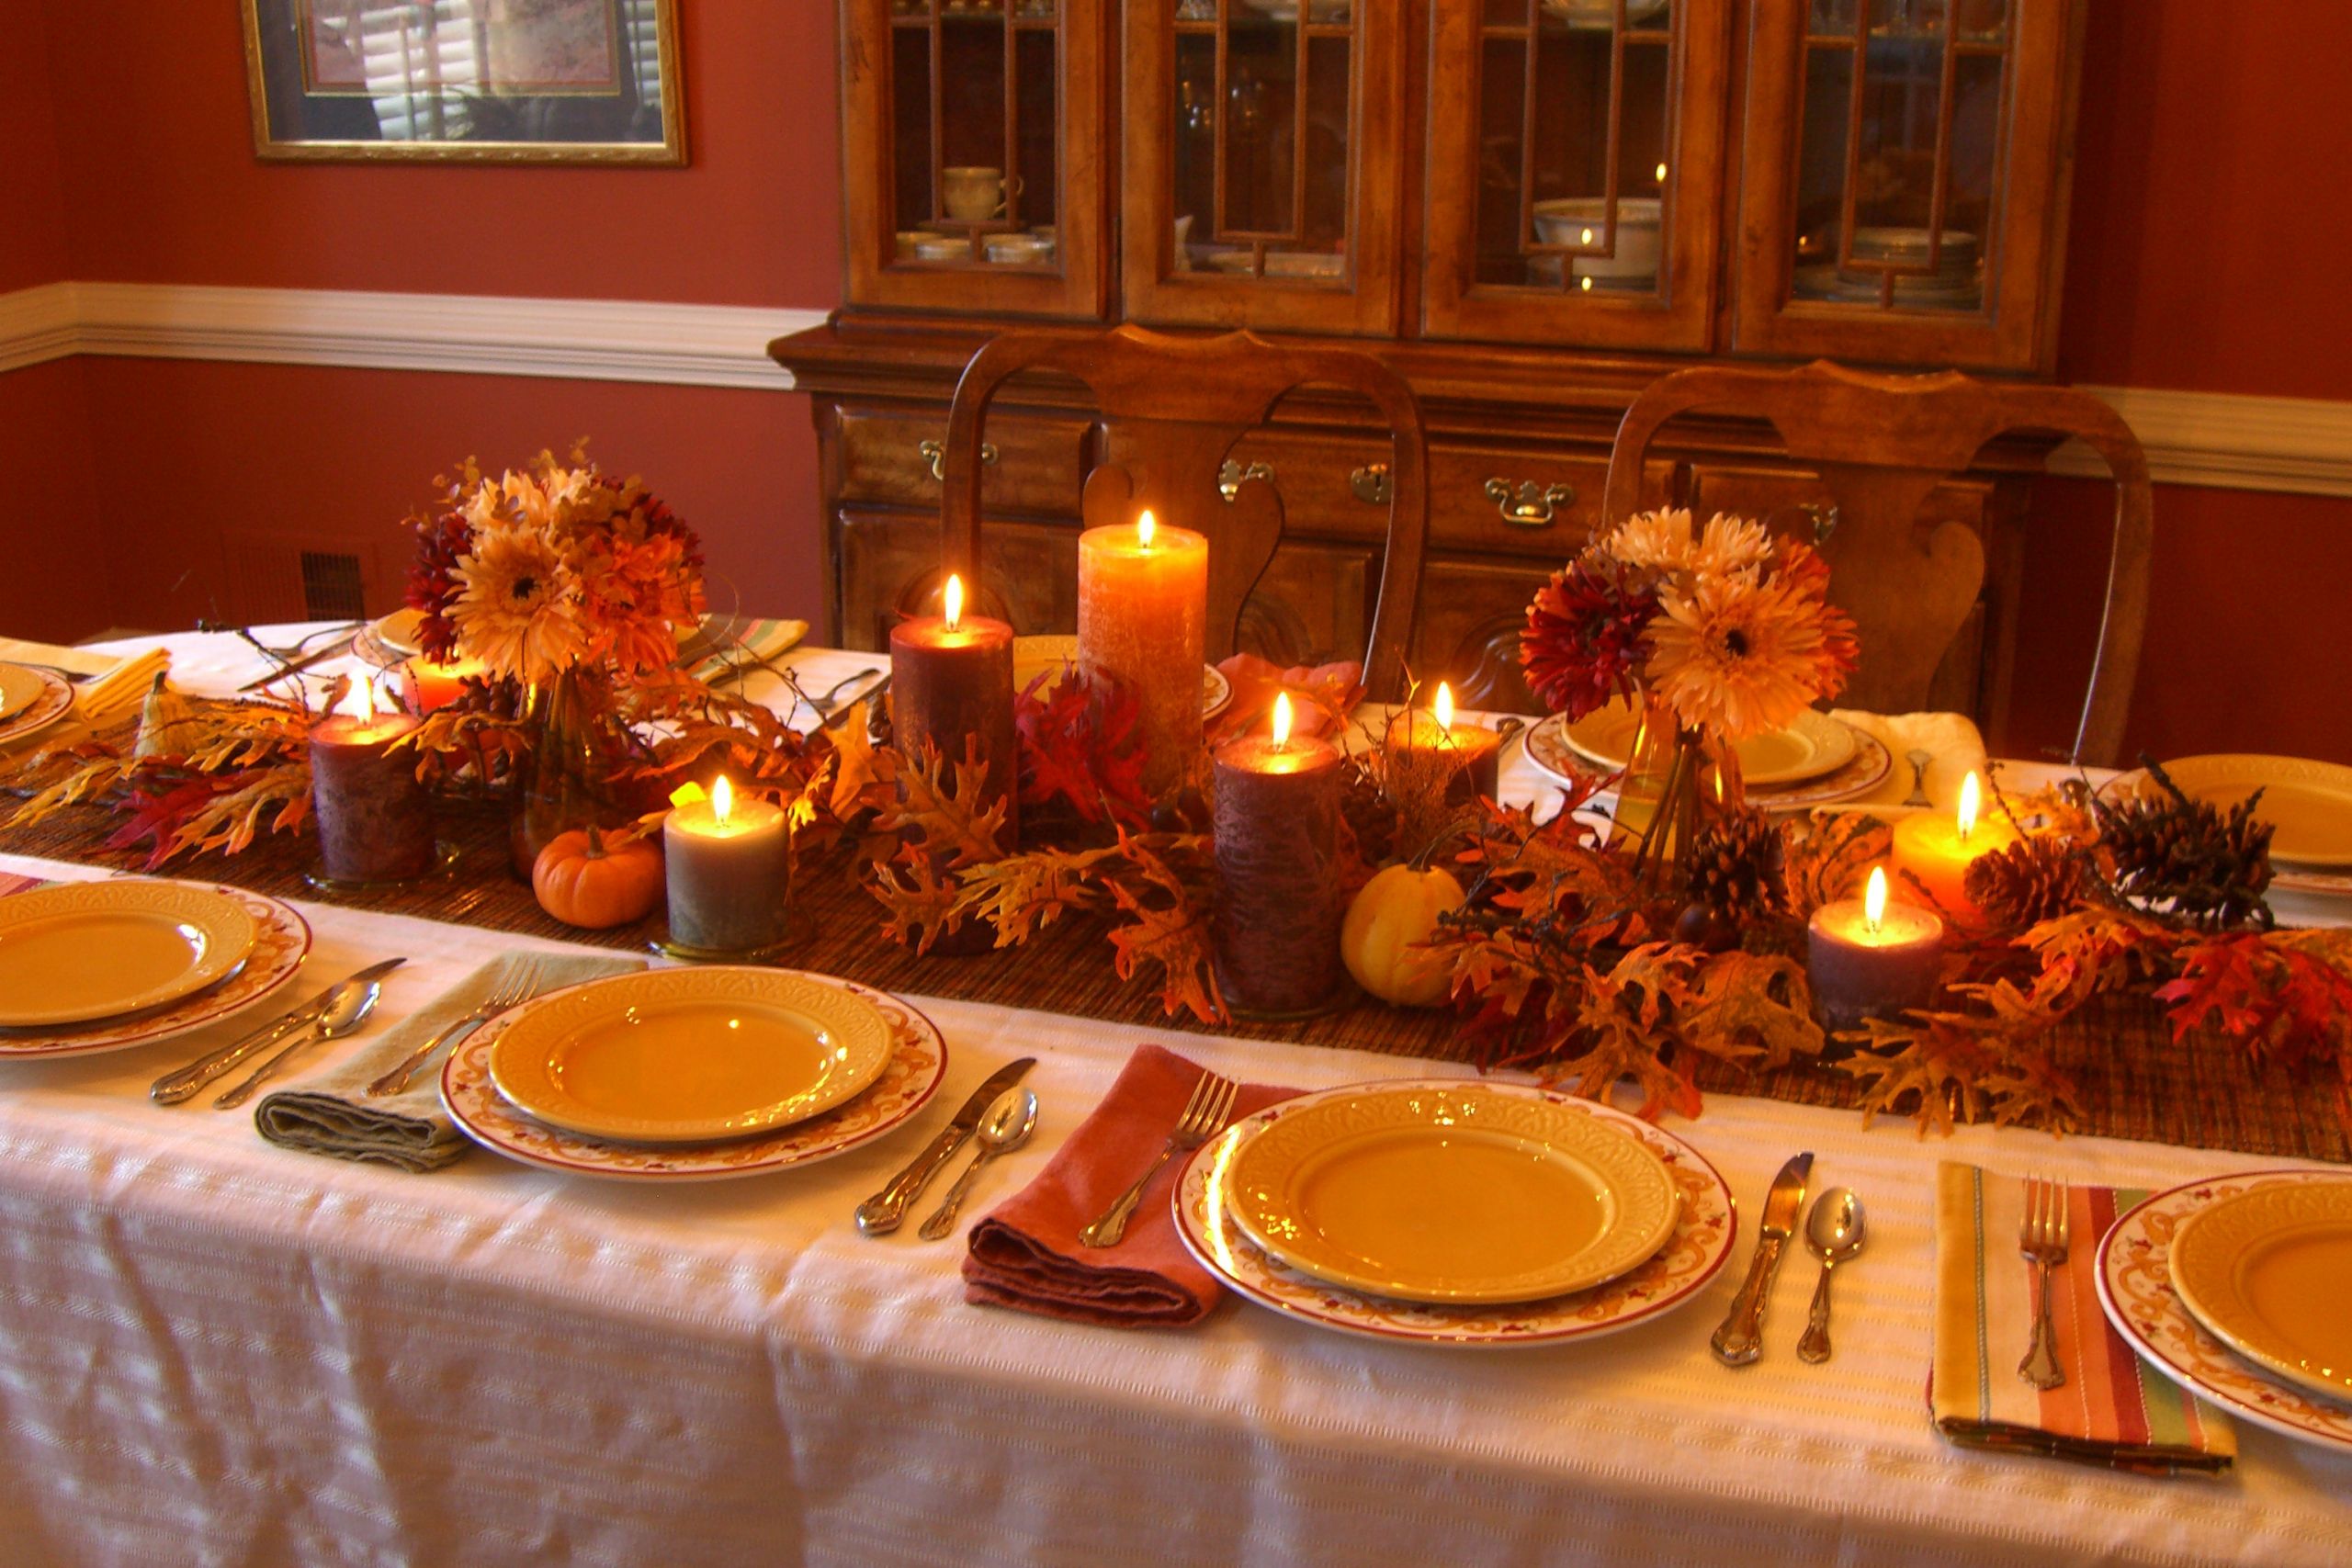 Thanksgiving Dinner Party Decorating Ideas
 Decorating My Thanksgiving Table